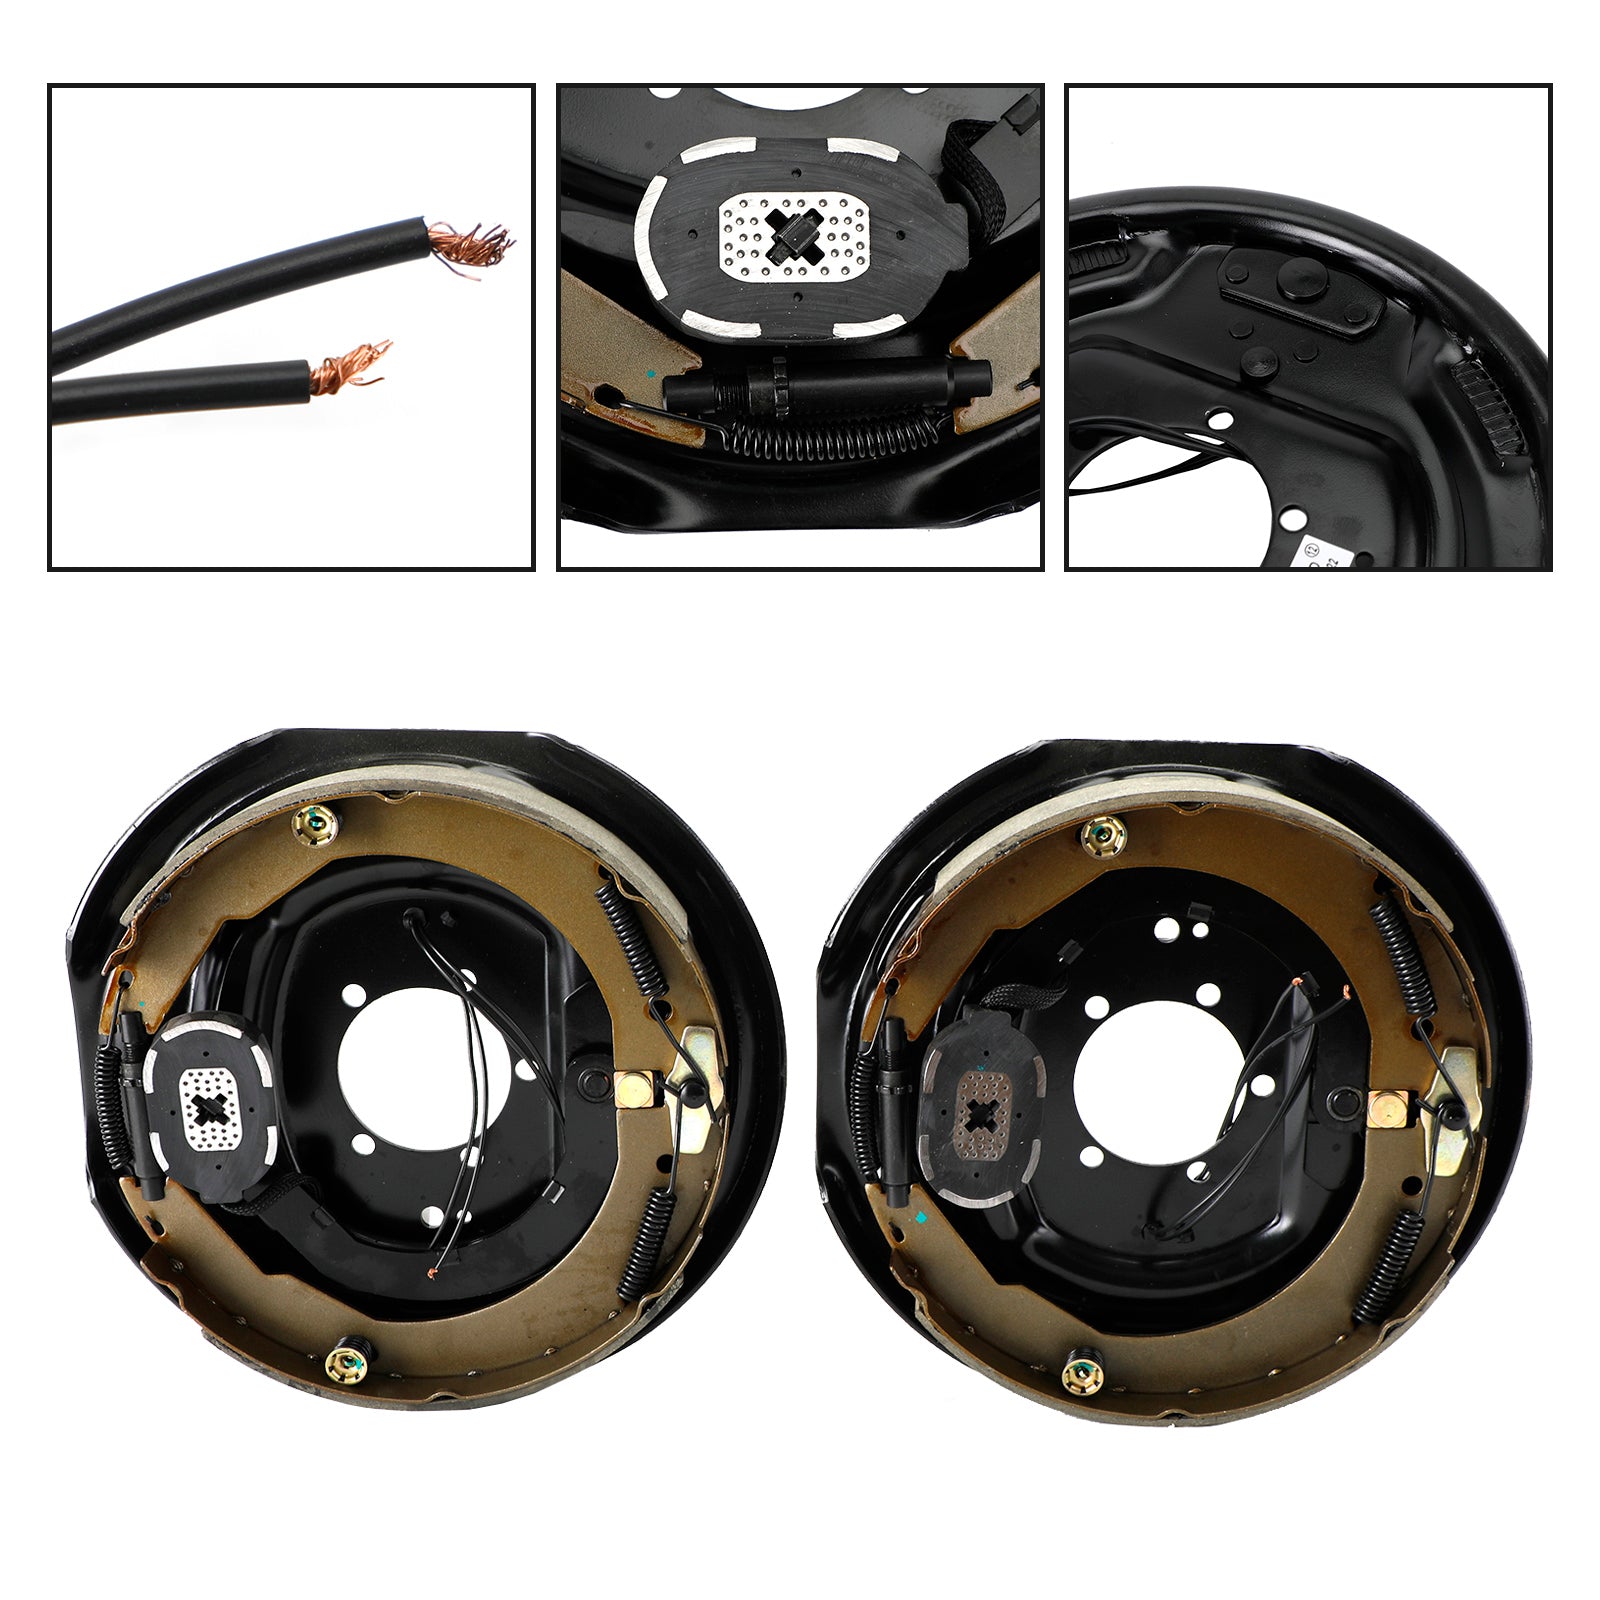 12" Electric Trailer Brake Kit-Left and Right Hand Assemblies-5200 to 7000 lbs - 0